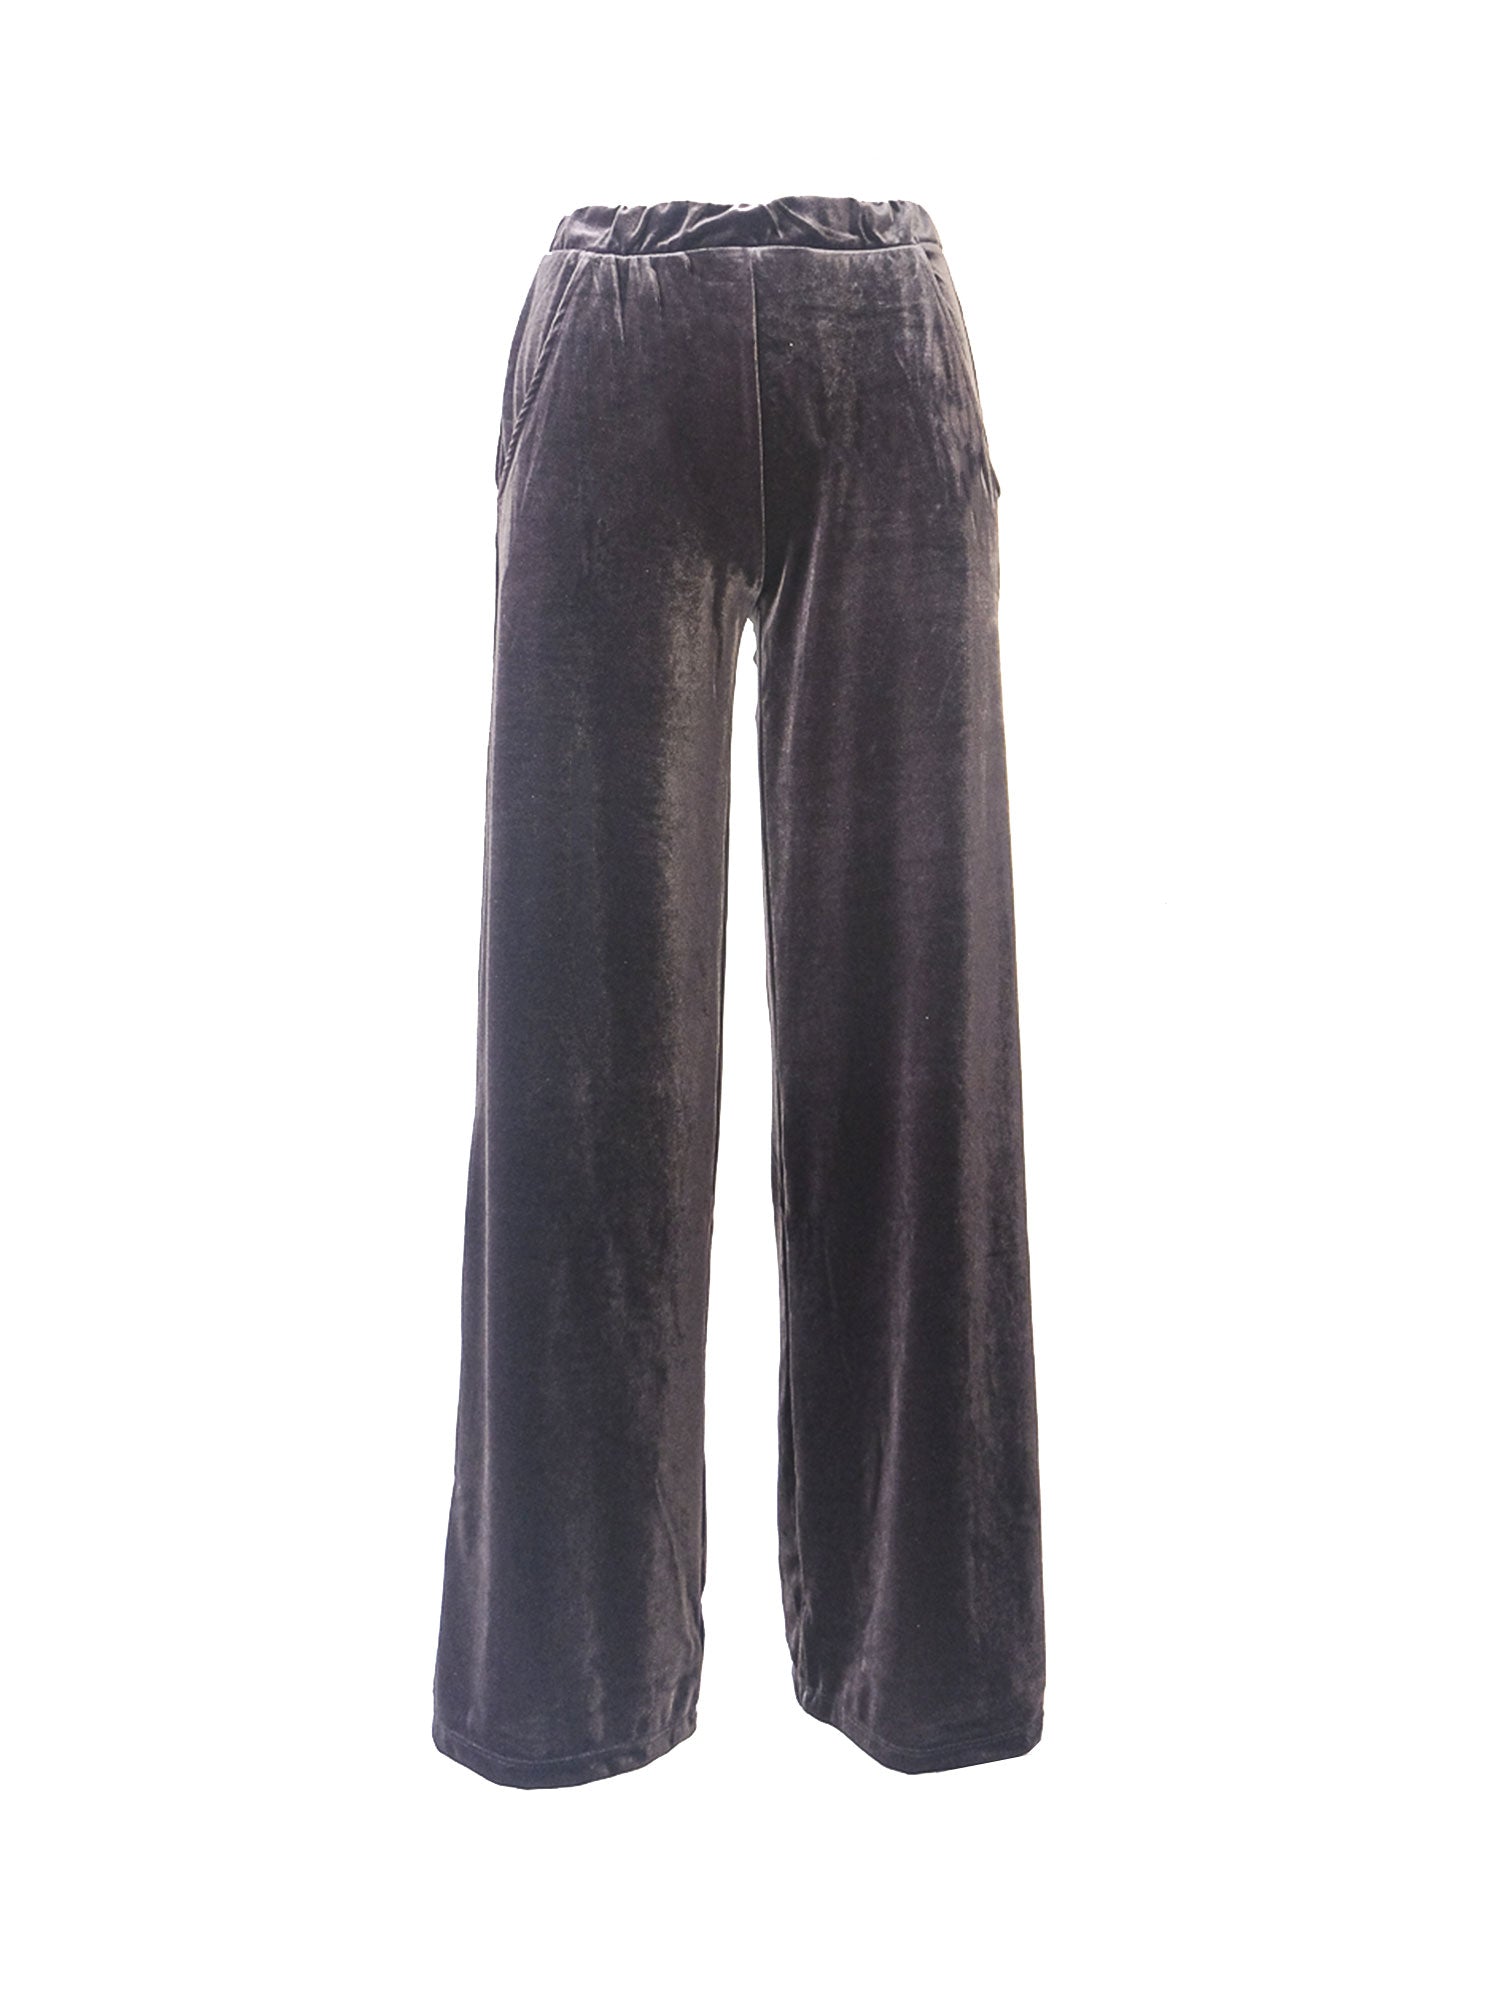 MAXIE - palazzo trousers with side pockets in brown chenille